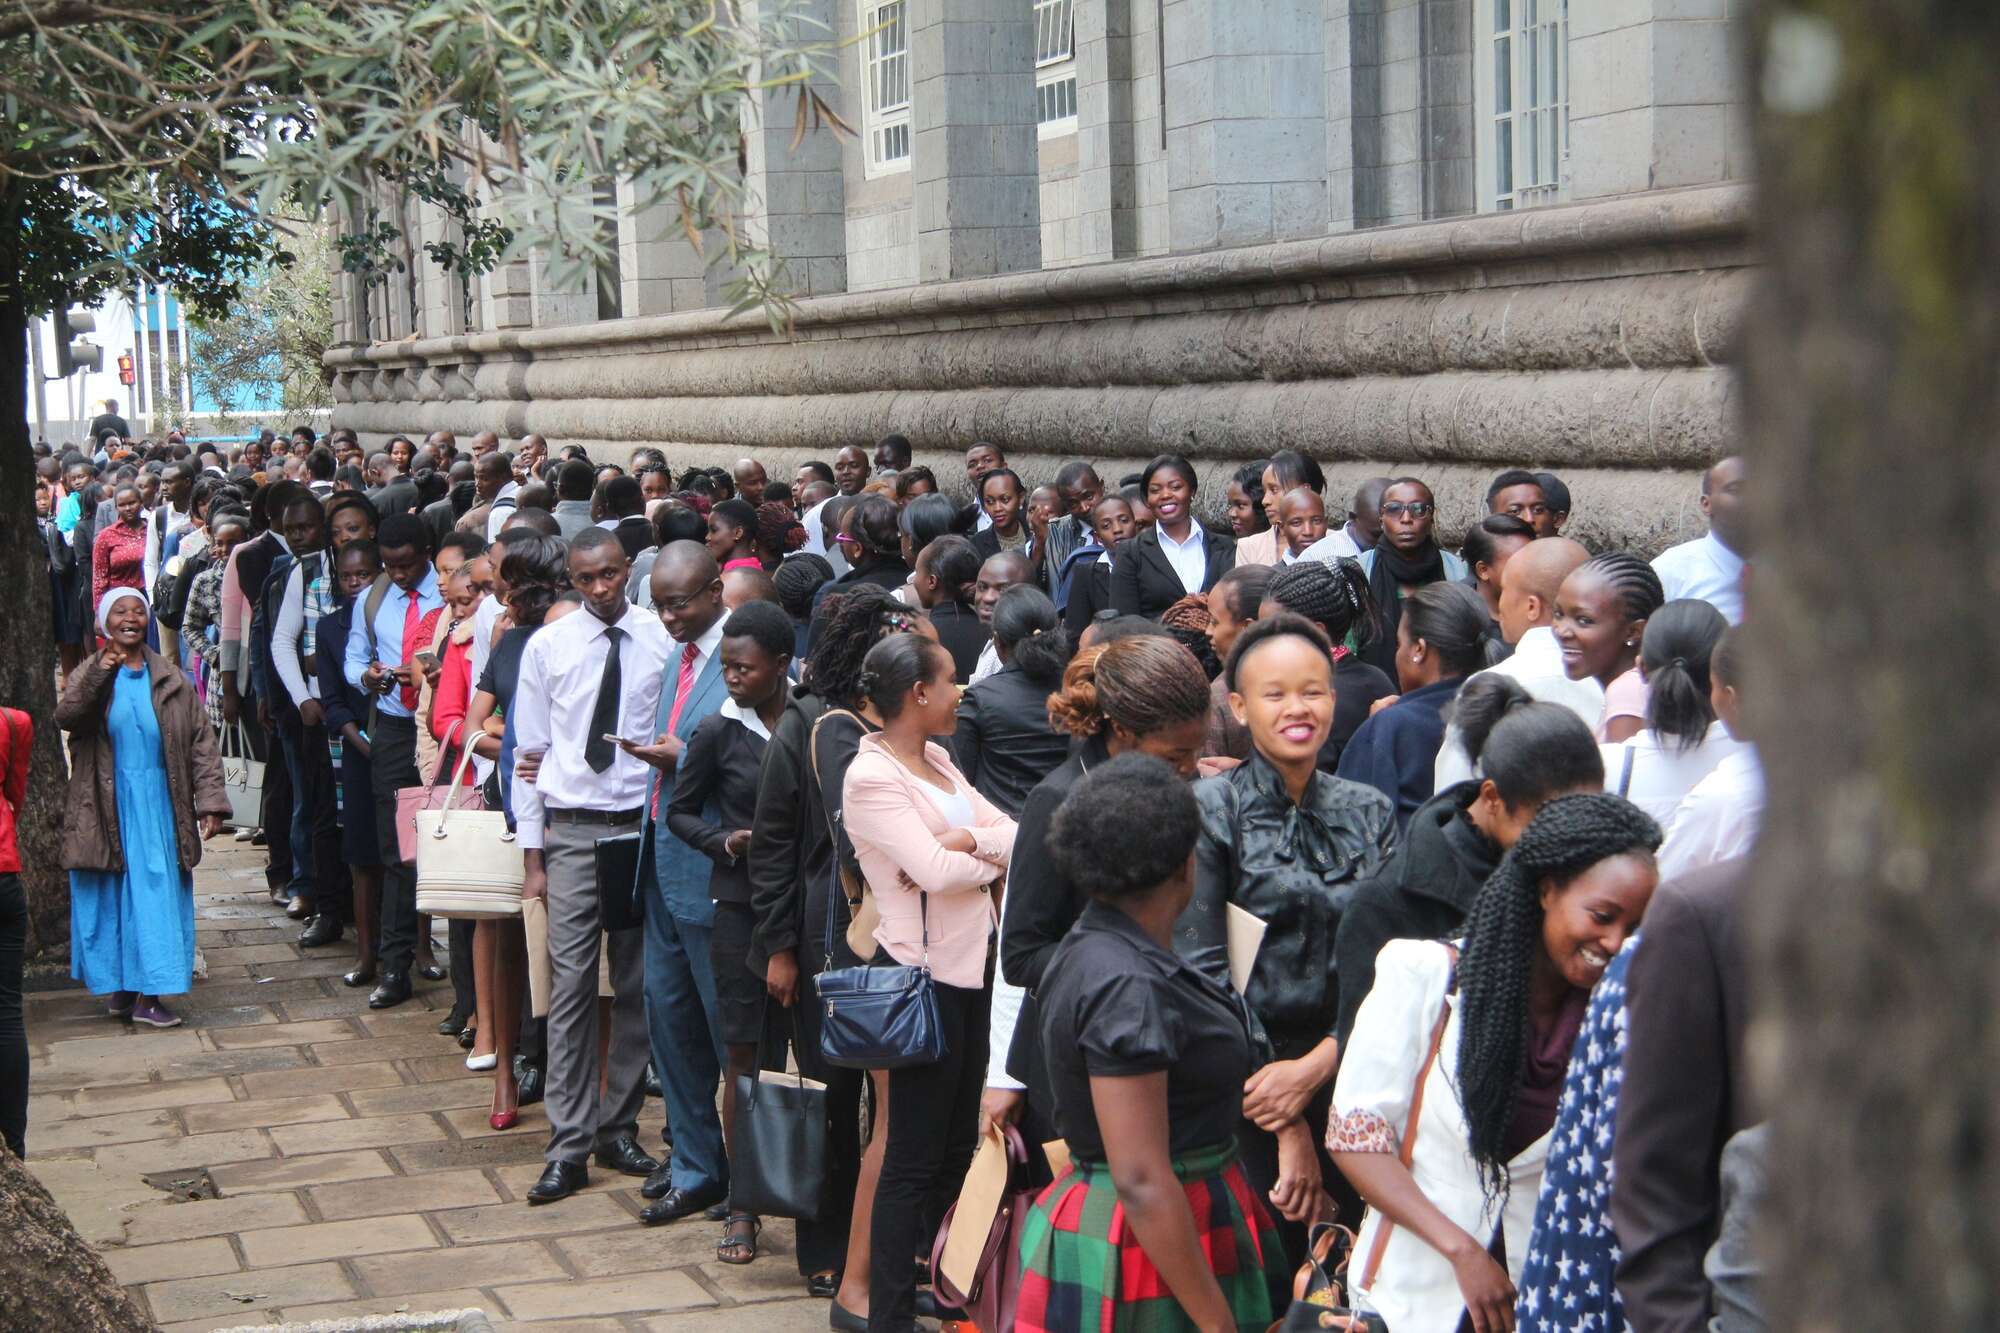 Poor pay and economic prospect pushing Kenyans to seek jobs abroad - report